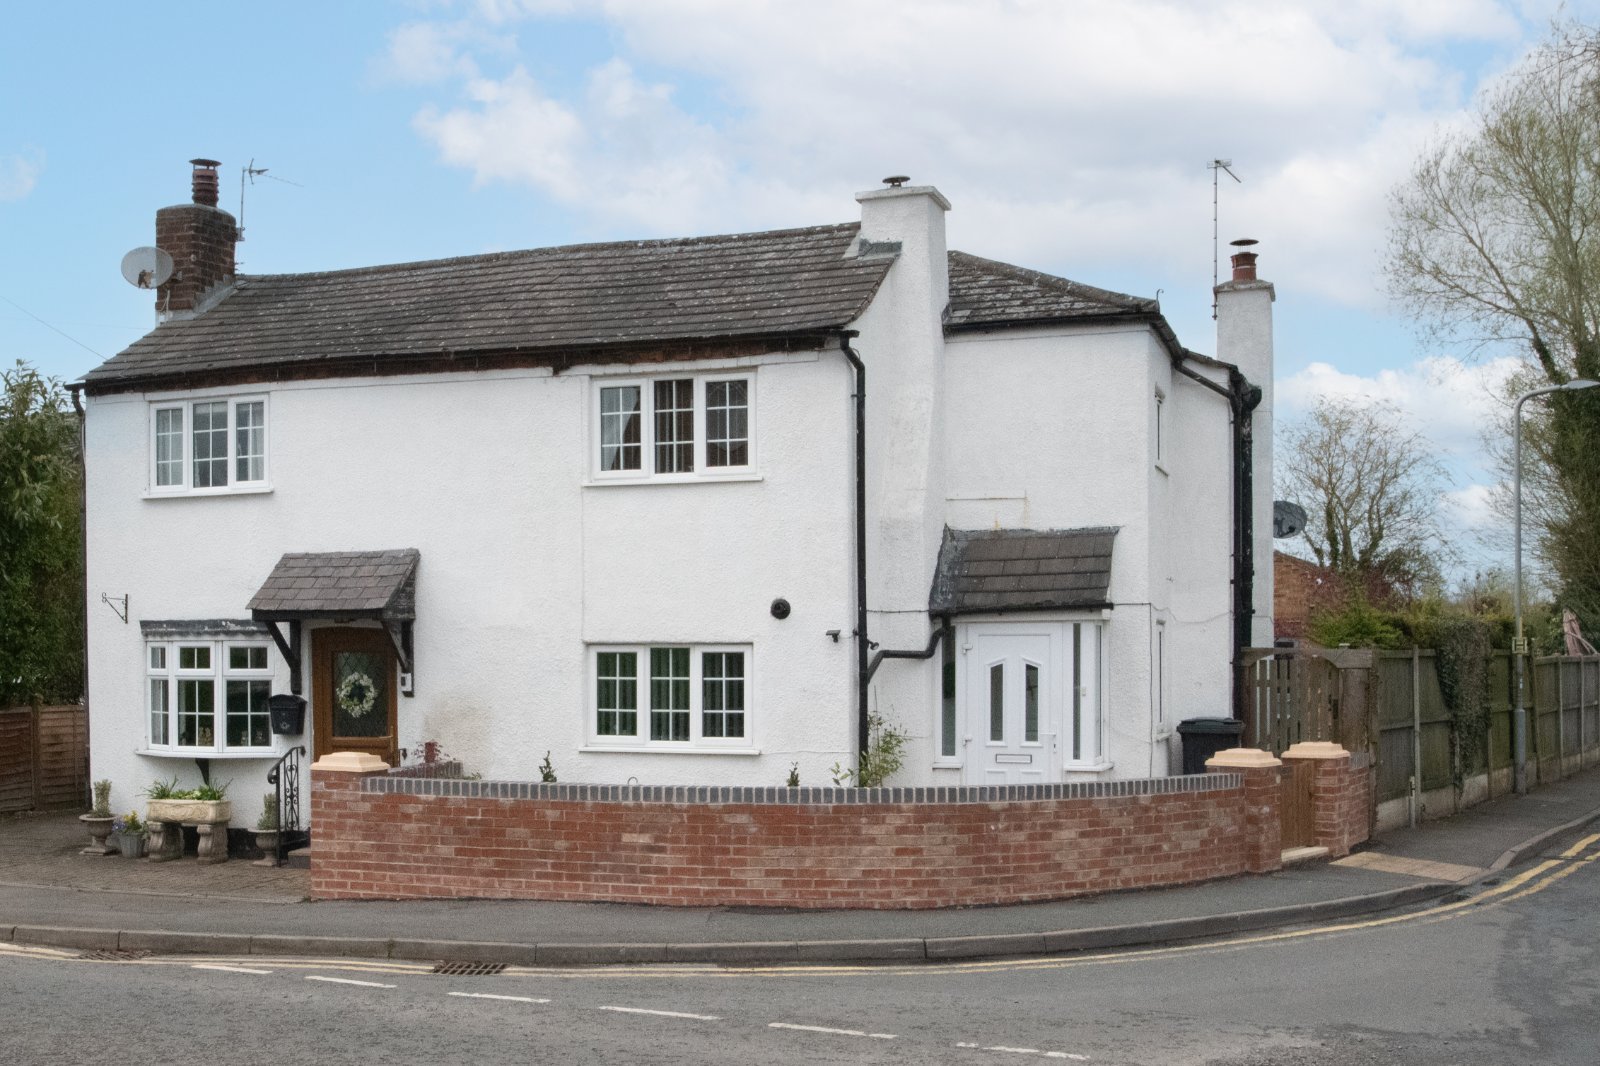 3 bed for sale in Astwood Lane, Feckenham - Property Image 1